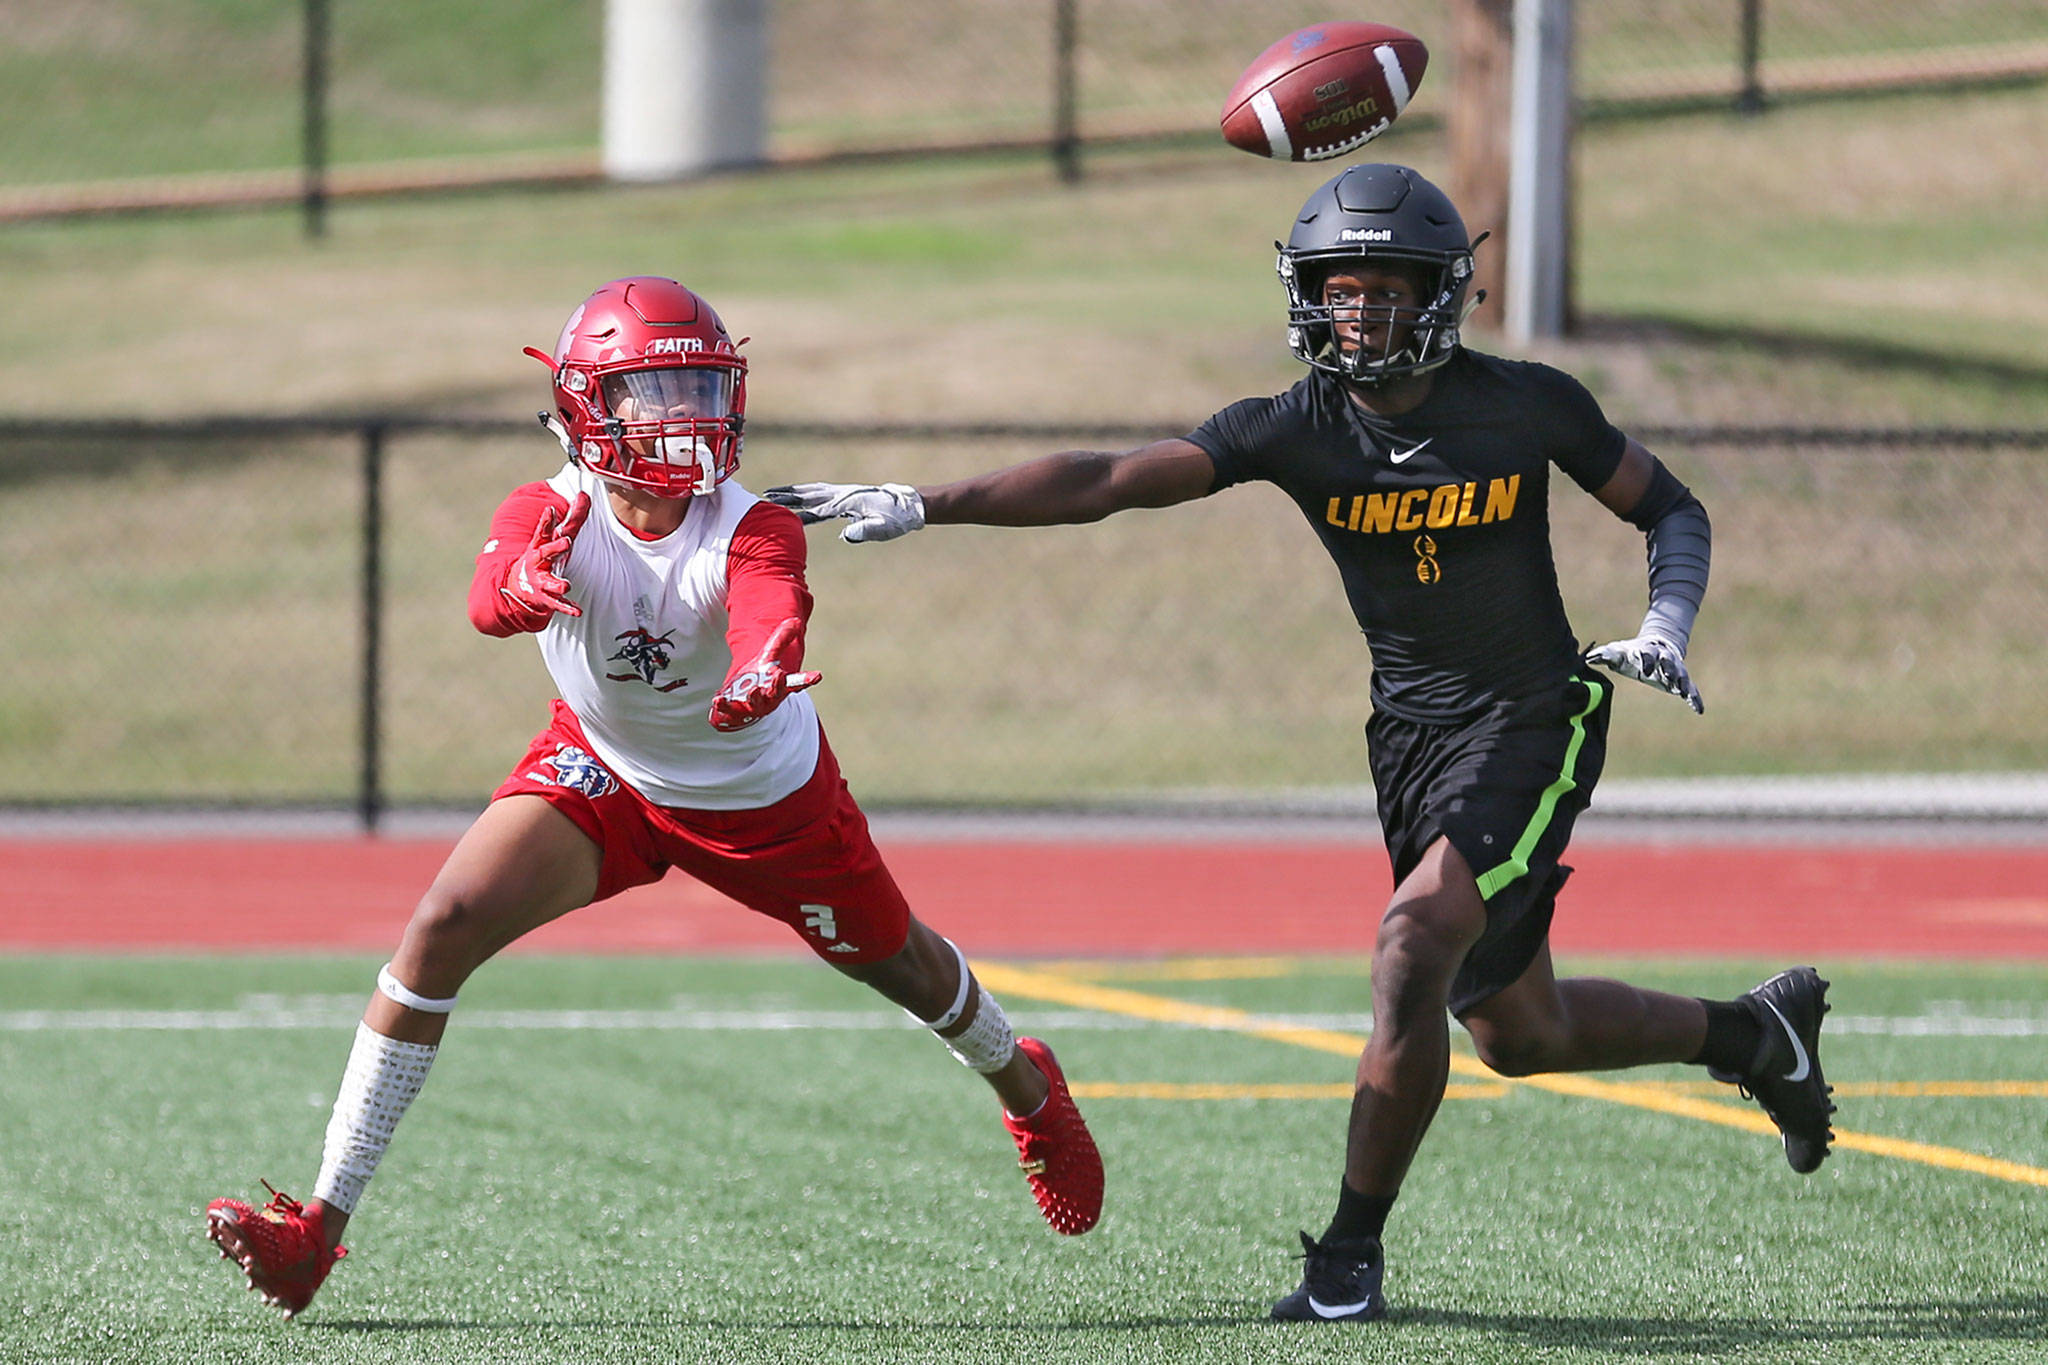 Saturday afternoon during the Cougar Championship Passing Tournament at Lakewood High School in Marysville on July 27, 2019. (Kevin Clark / The Herald)